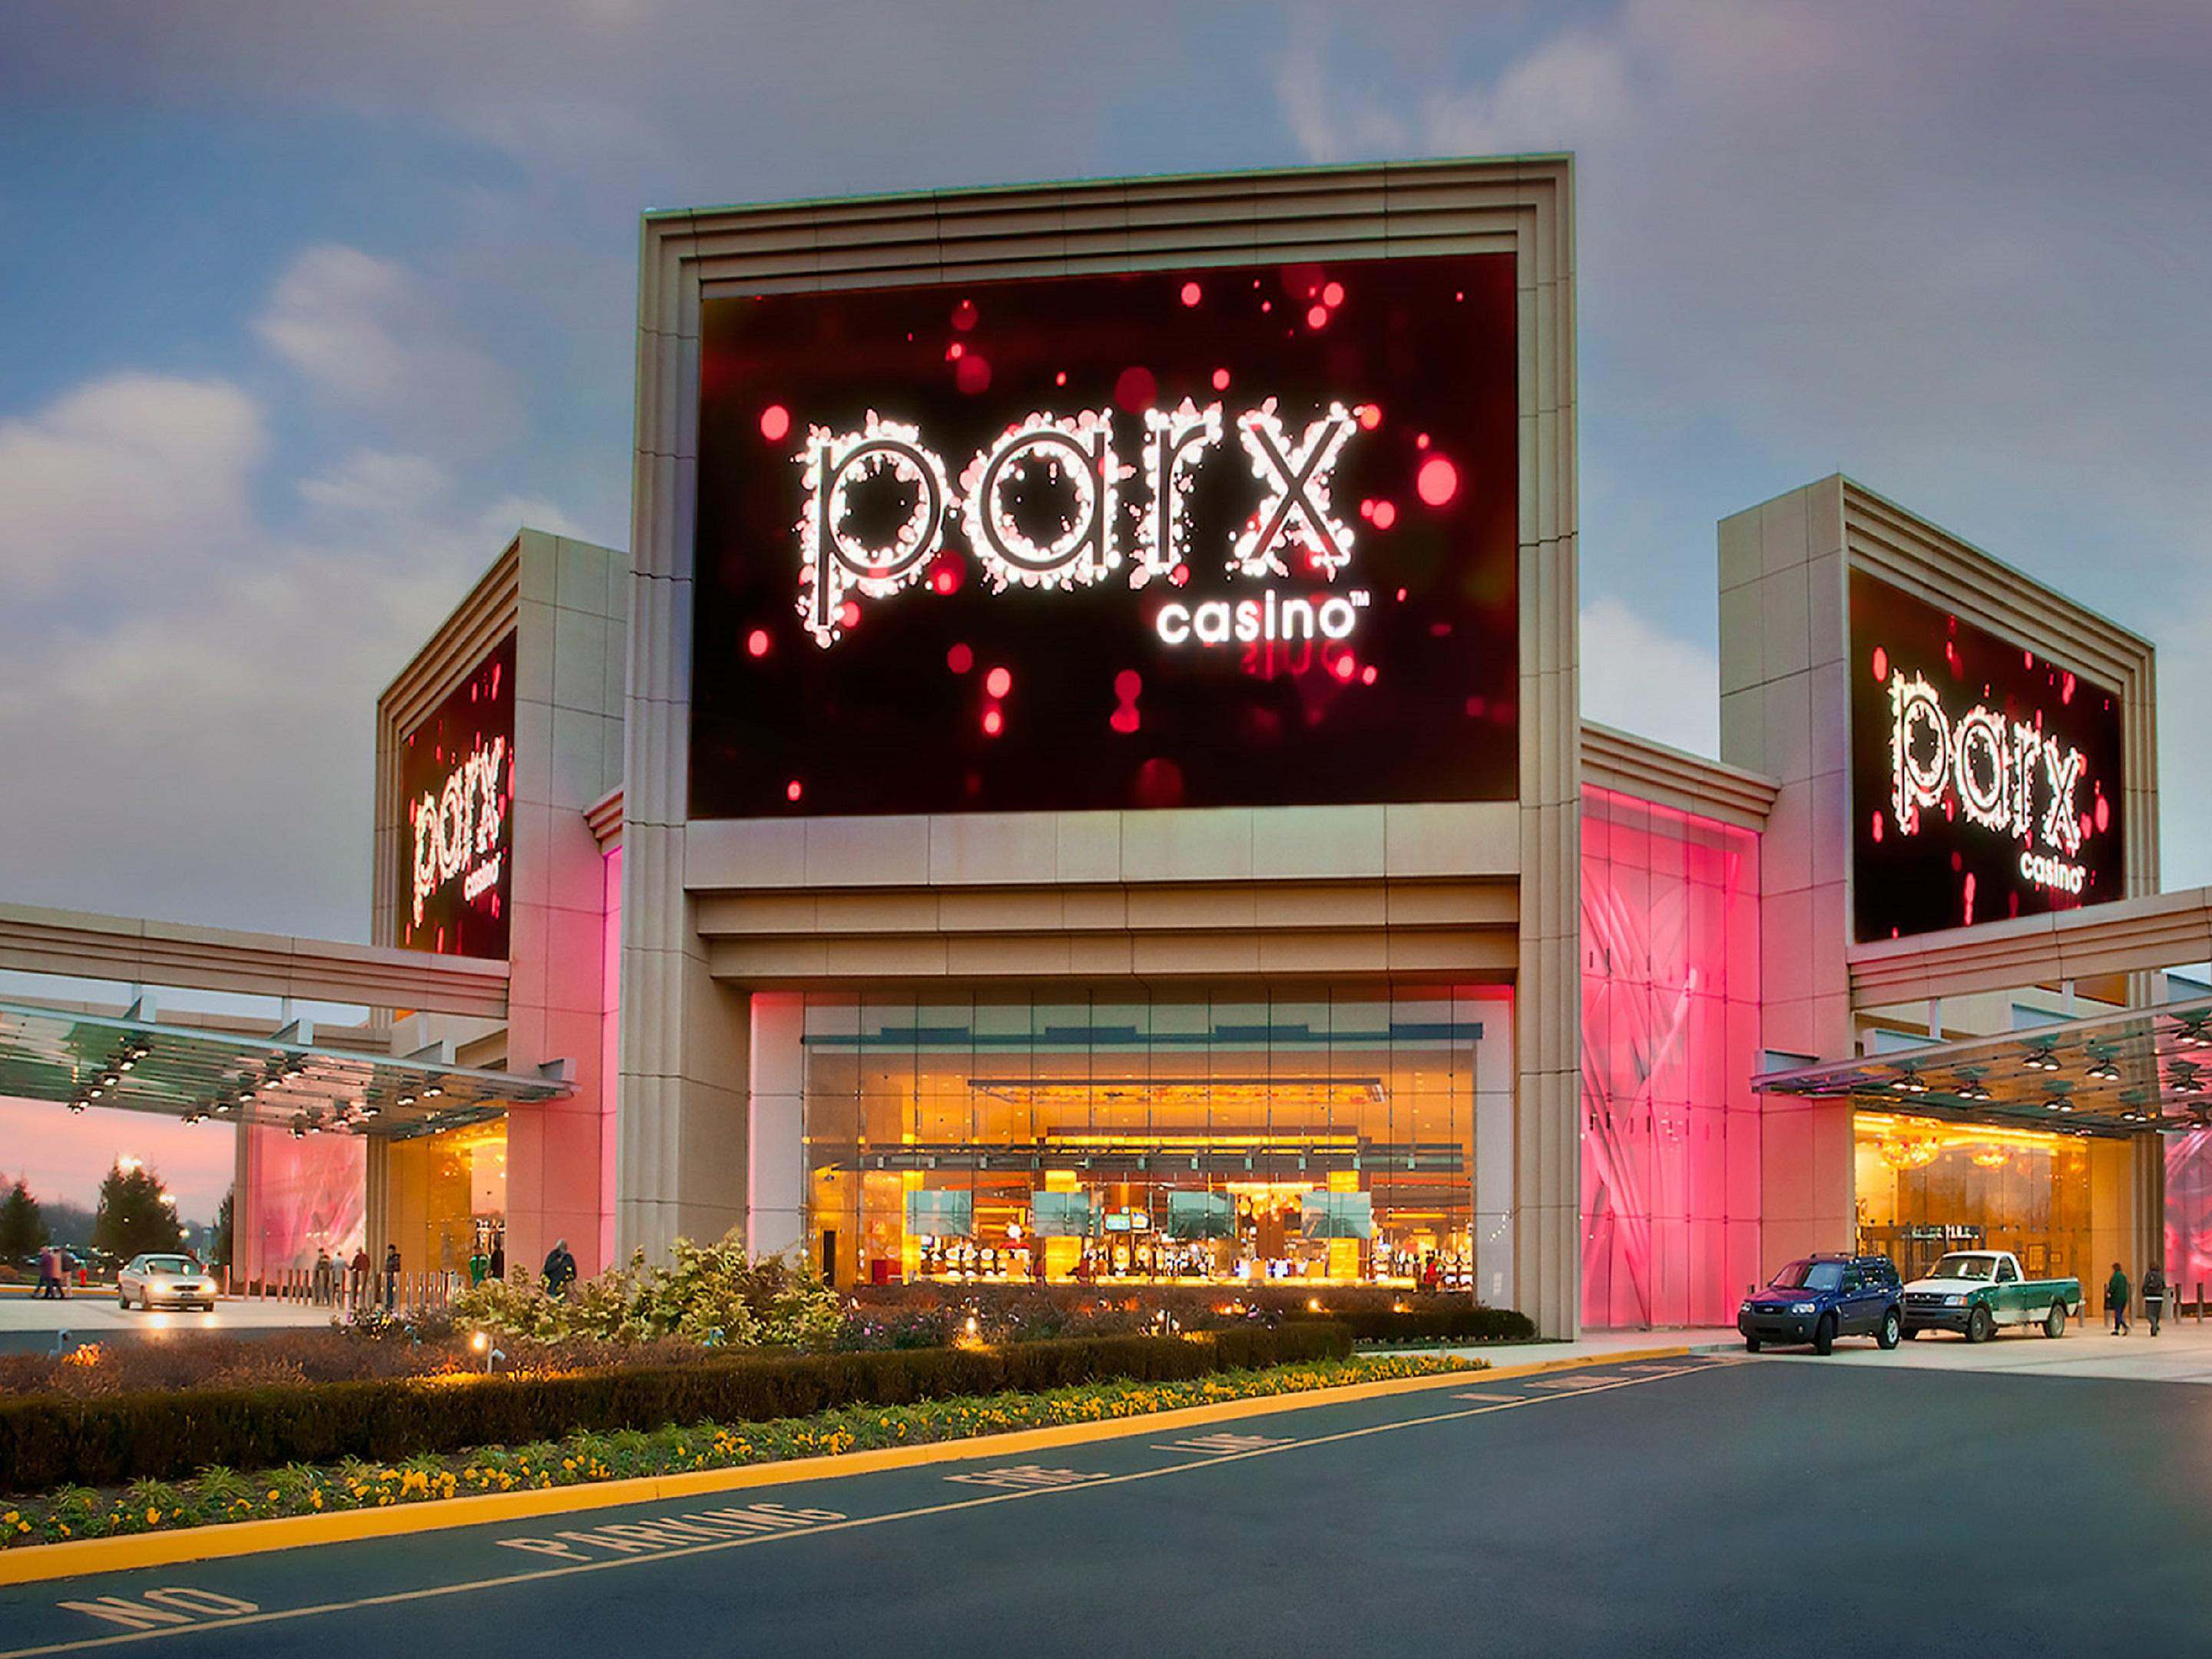 Parx Casino is nearby with entertainment, restaurants and gaming!